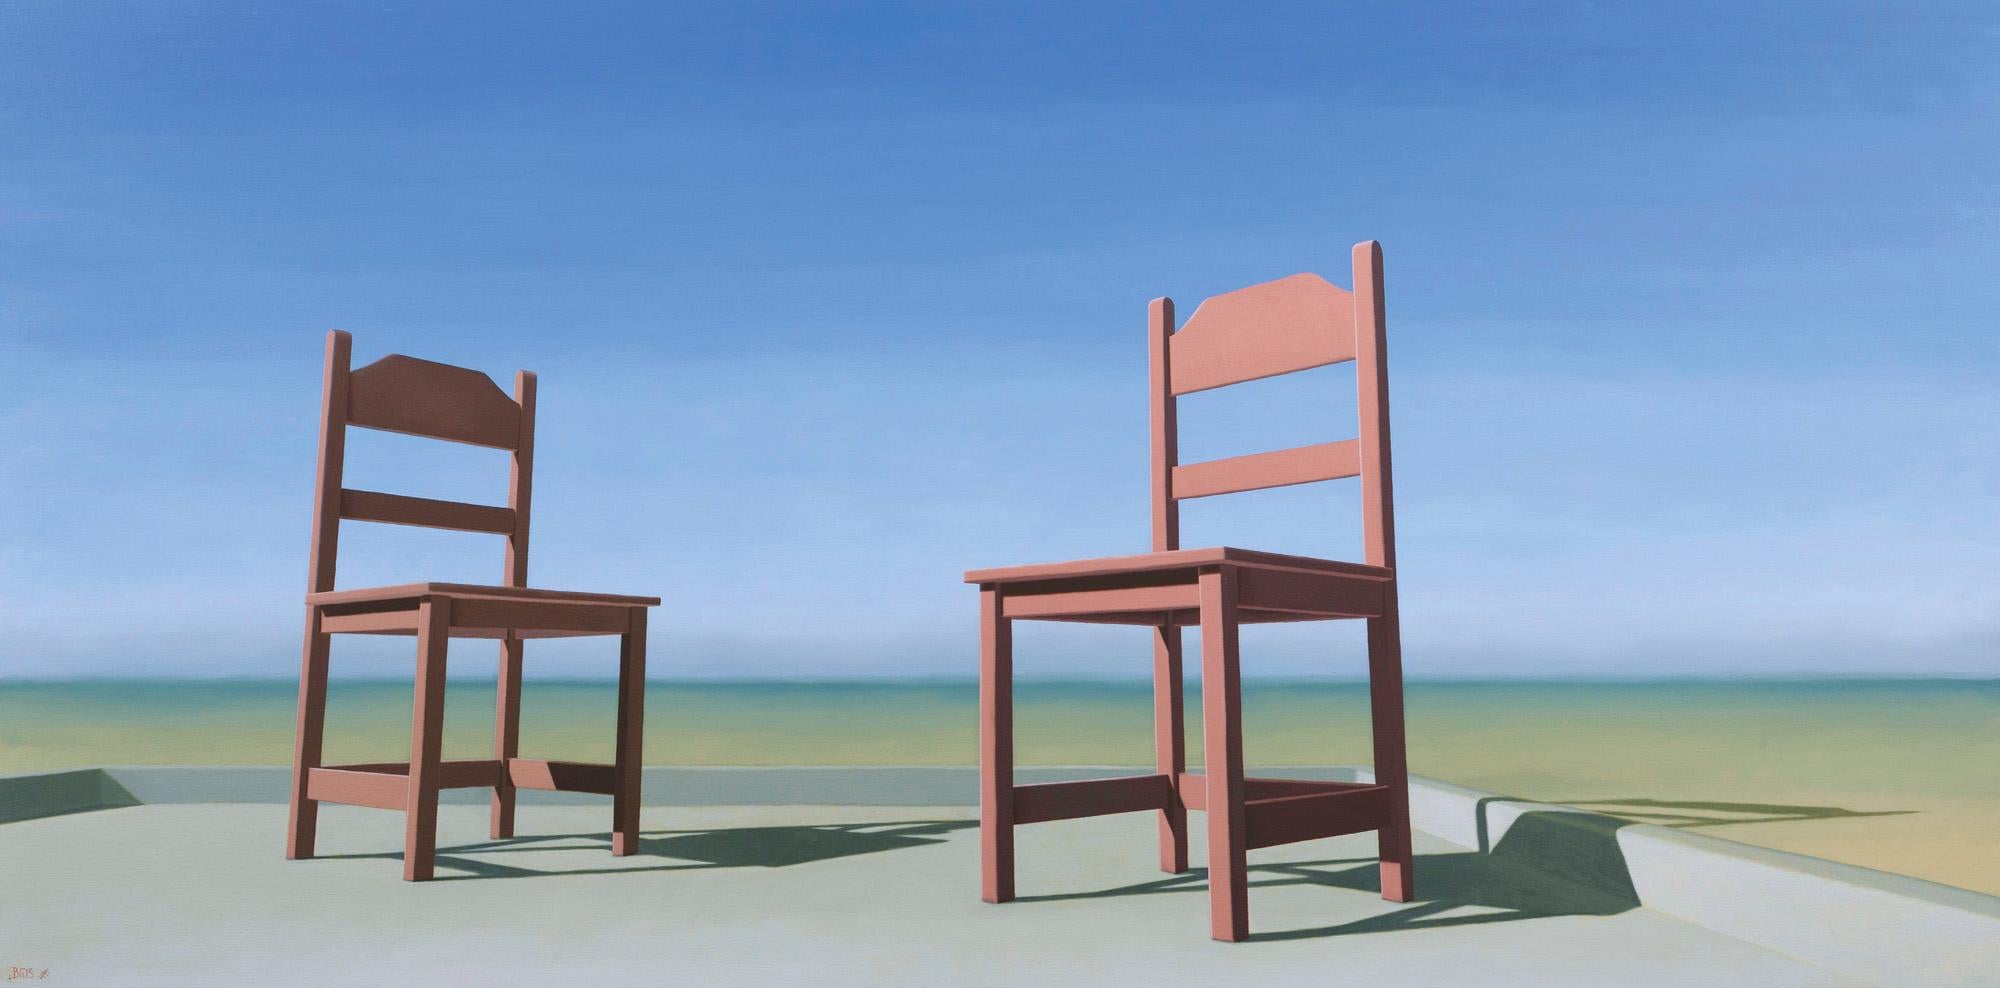 The Meeting - 21st Century Contemporary Oil Painting of Chairs with Blue Sky